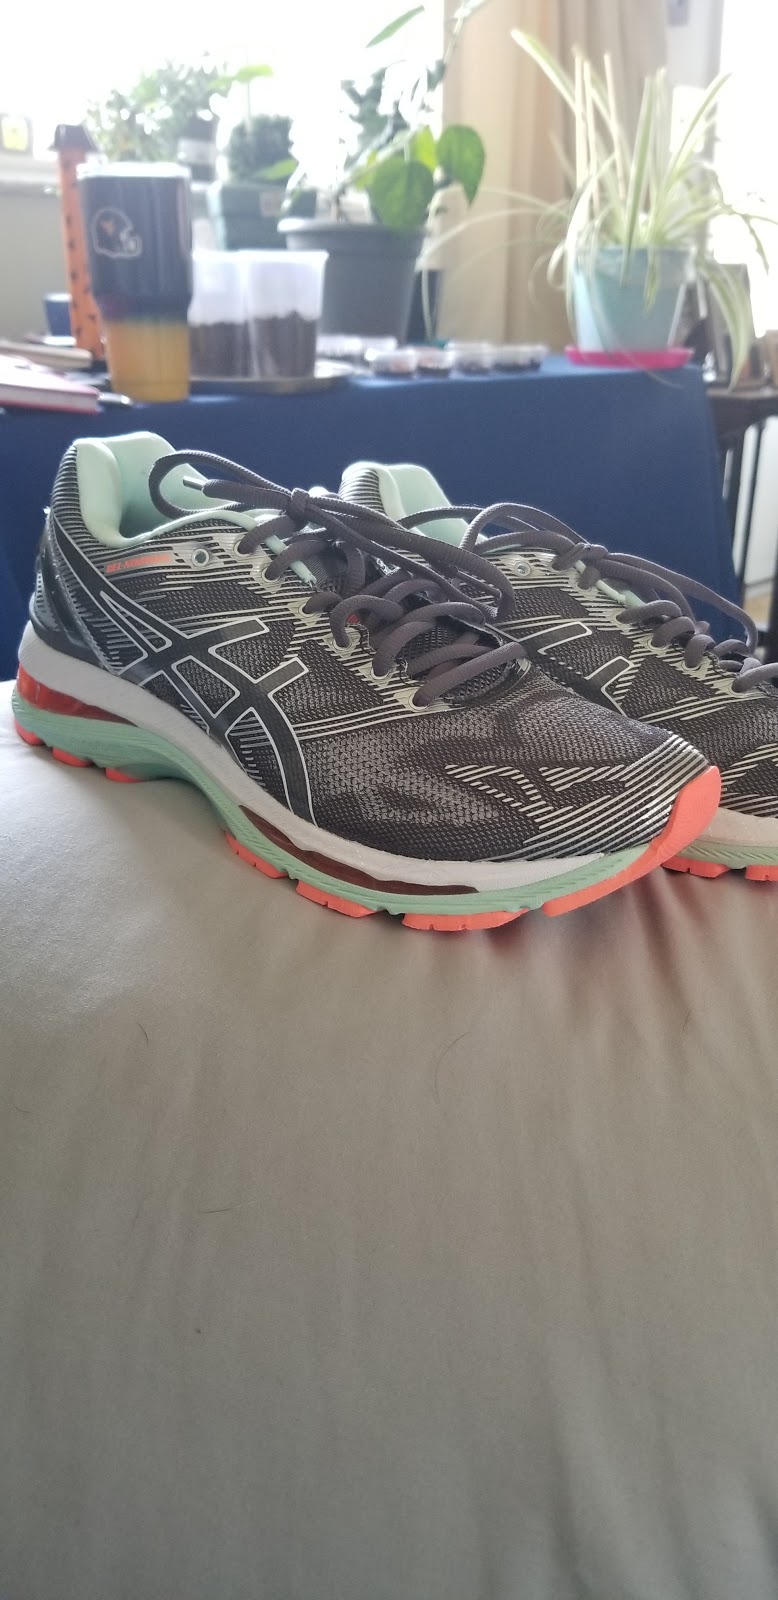 ASICS Outlet | 400 Premium Outlet Dr, Suite 826, Monroe, OH 45050, USA | Phone: (513) 539-2080